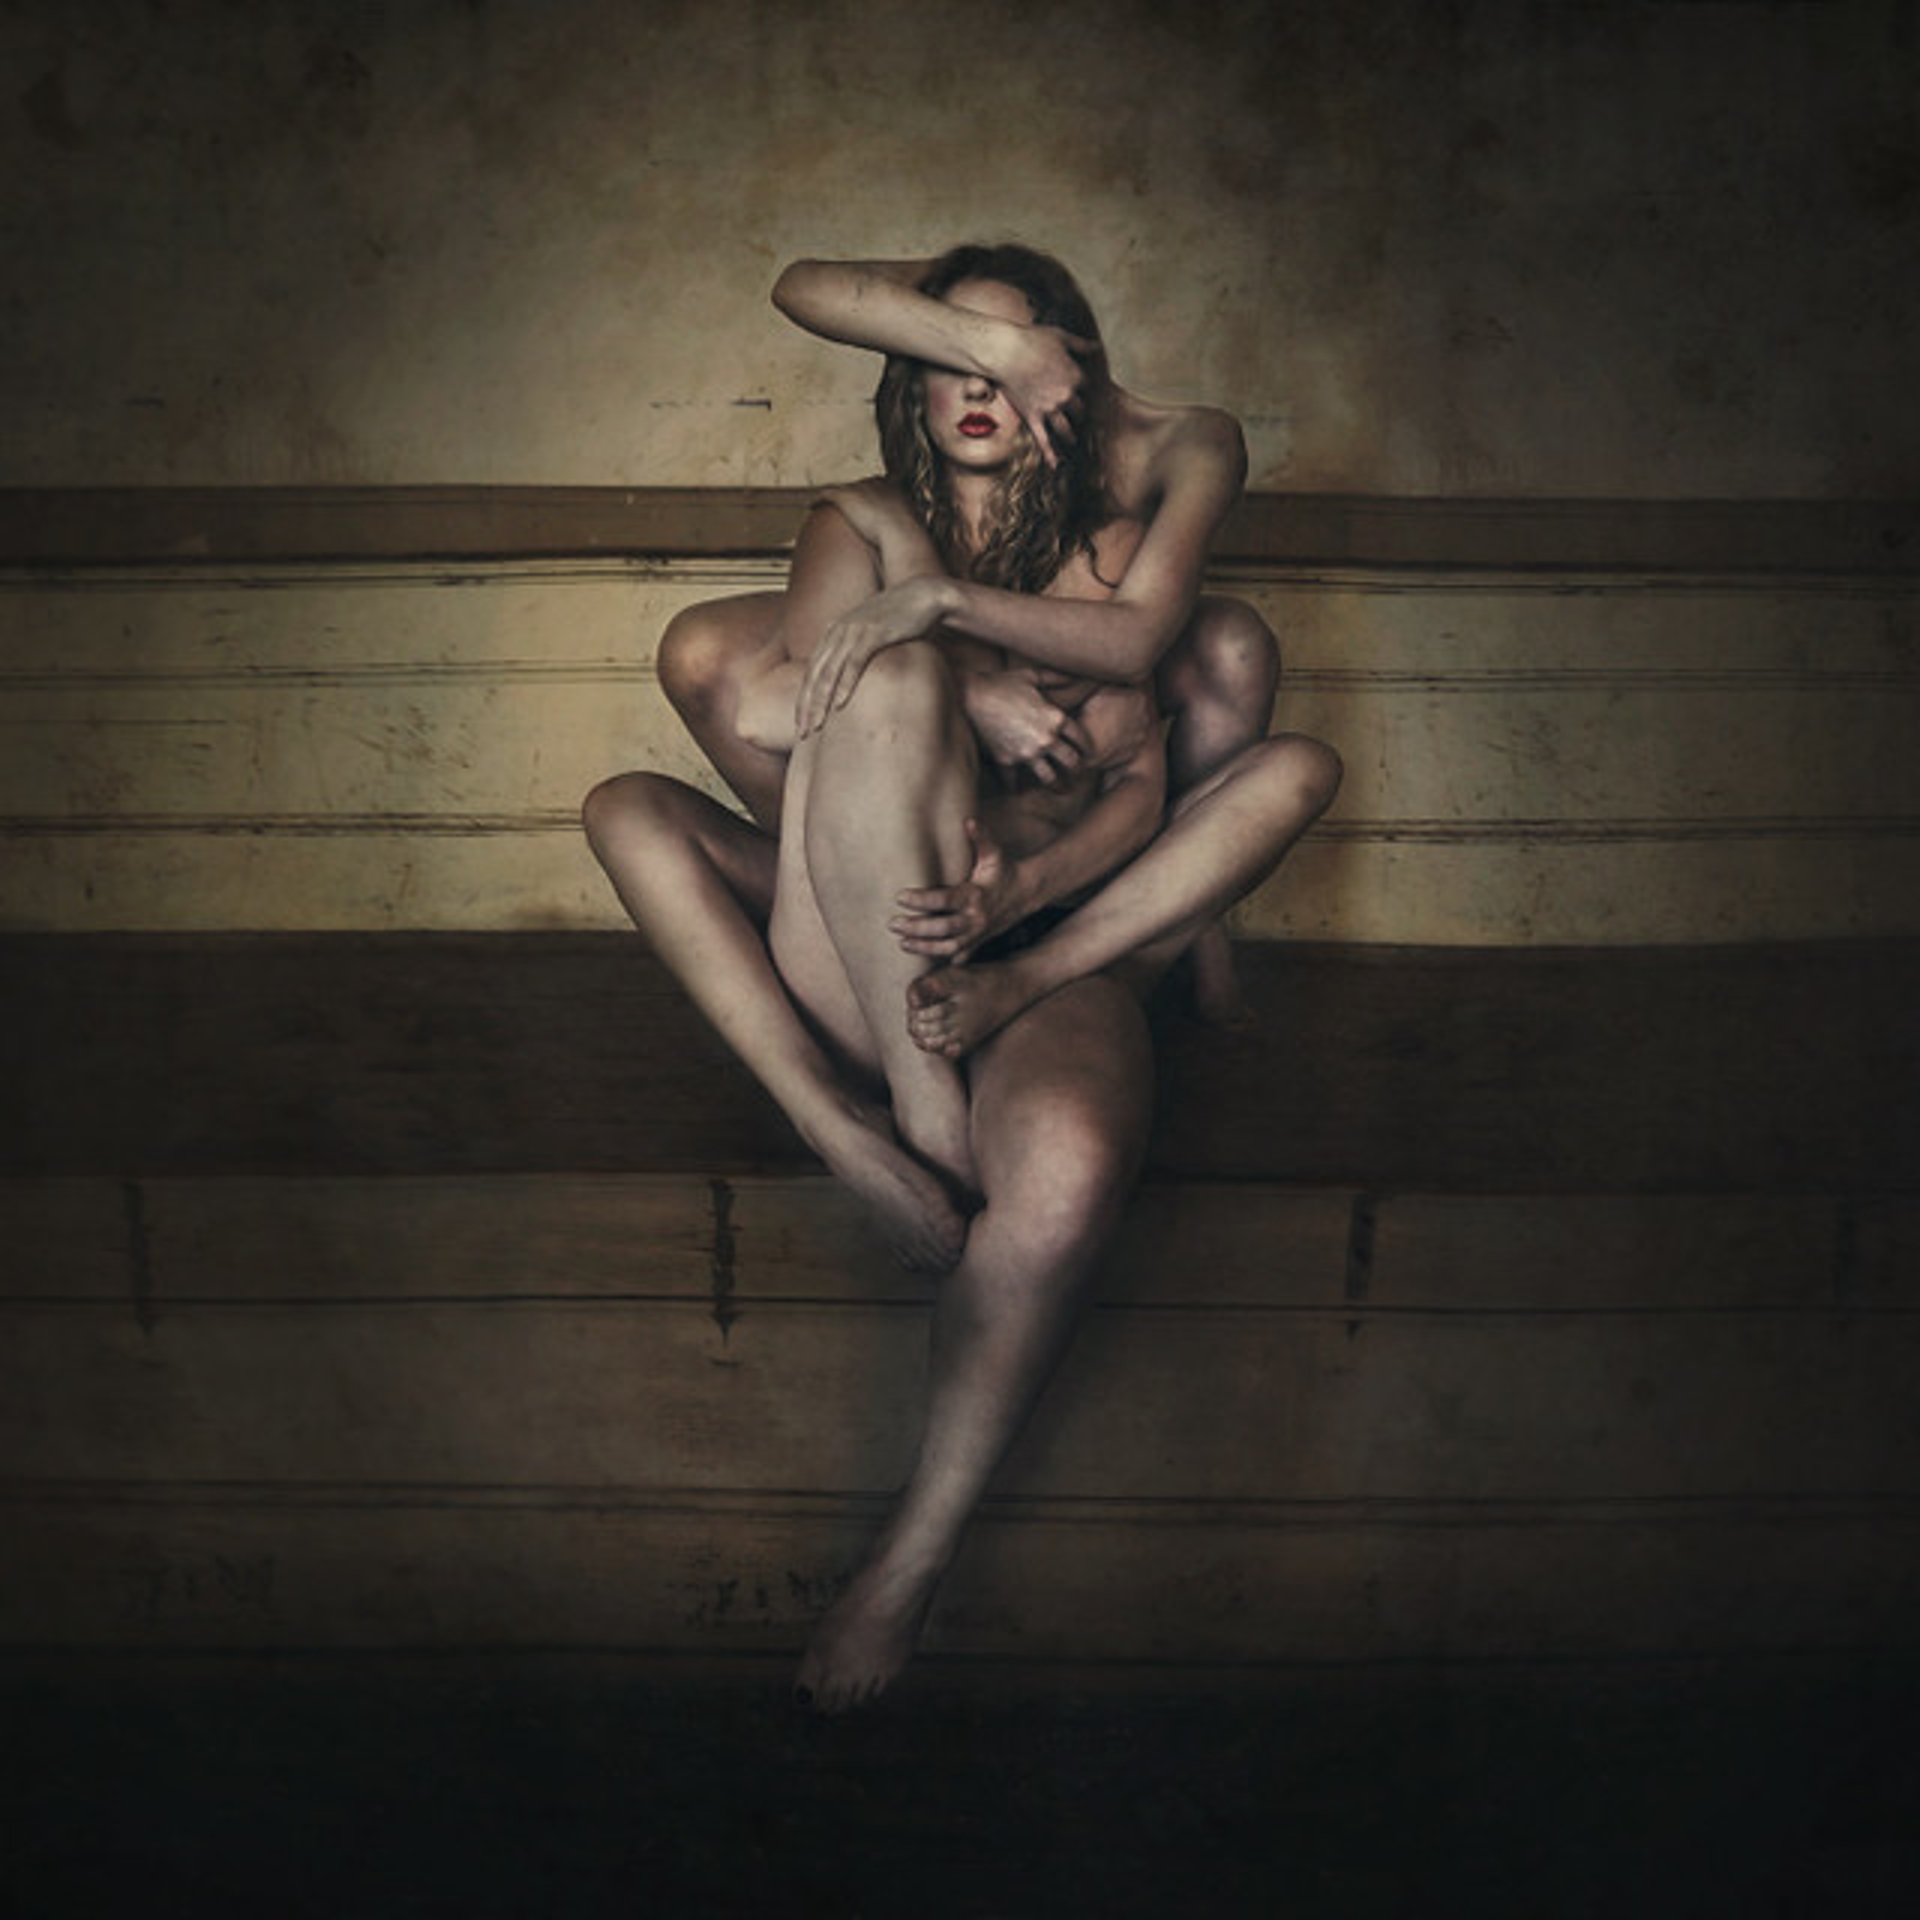 Holding On to Broken Pieces by Brooke Shaden